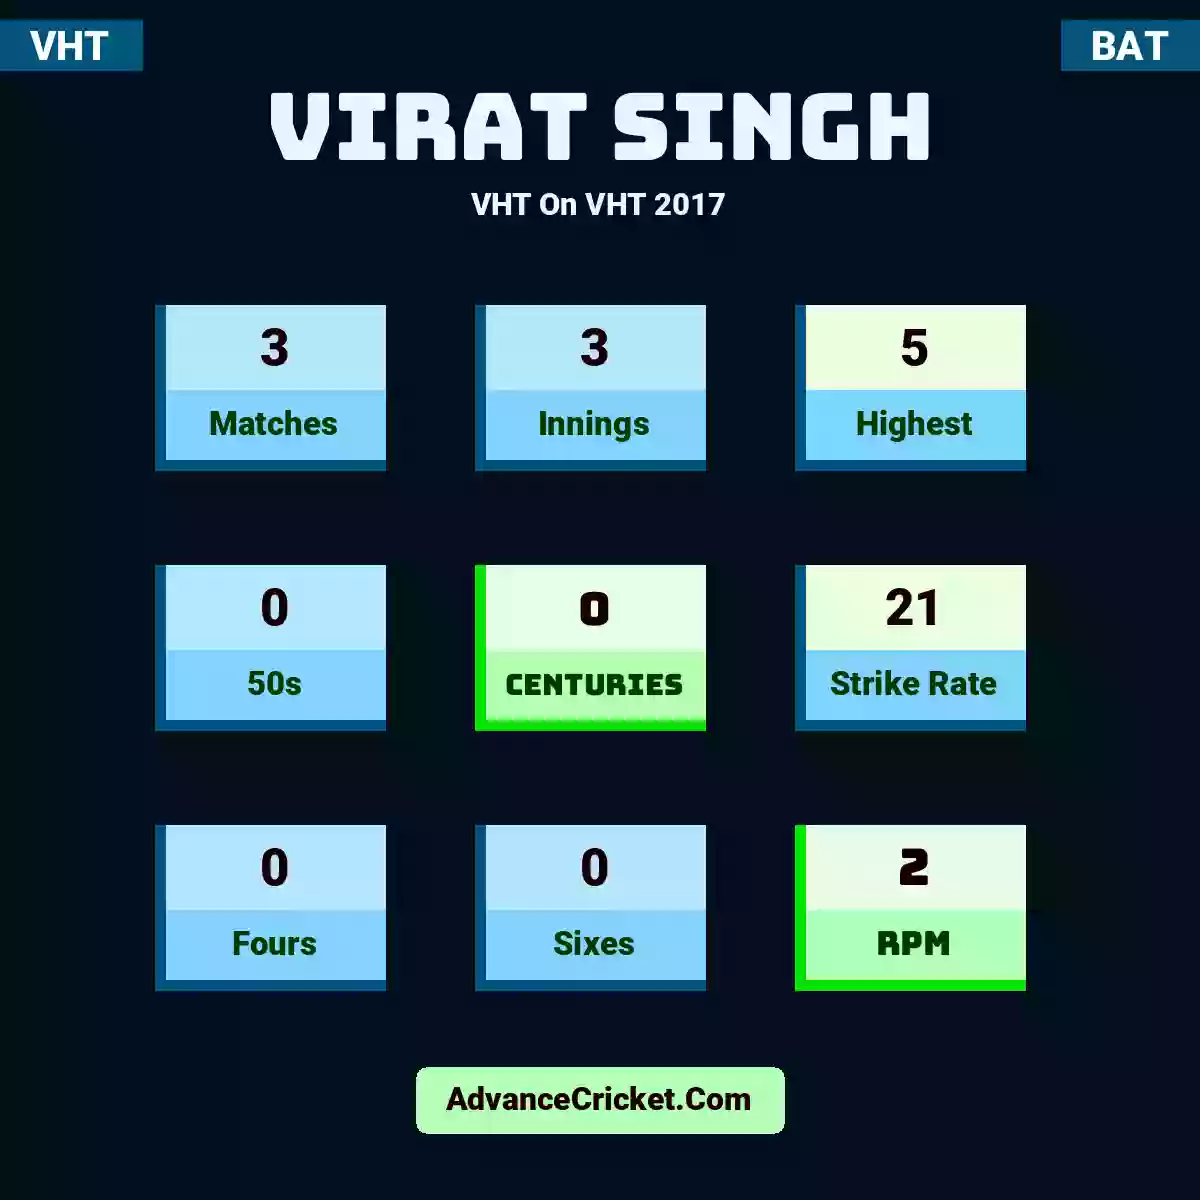 Virat Singh VHT  On VHT 2017, Virat Singh played 3 matches, scored 5 runs as highest, 0 half-centuries, and 0 centuries, with a strike rate of 21. V.Singh hit 0 fours and 0 sixes, with an RPM of 2.